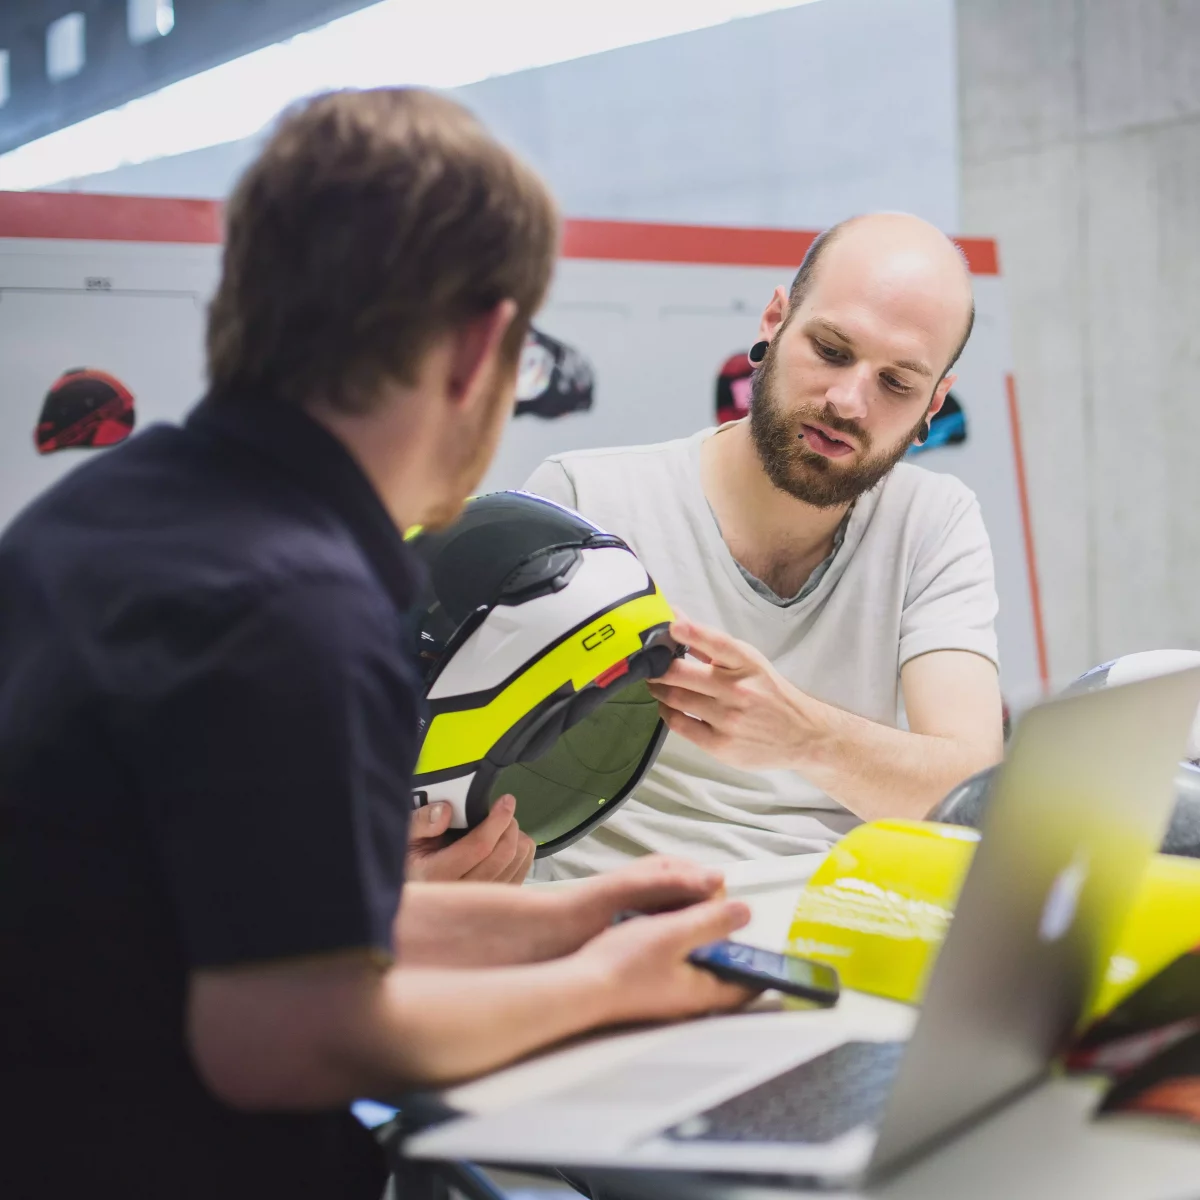 KISKA designers reviewing the colour, trim and graphics of the Schuberth C3 helmet